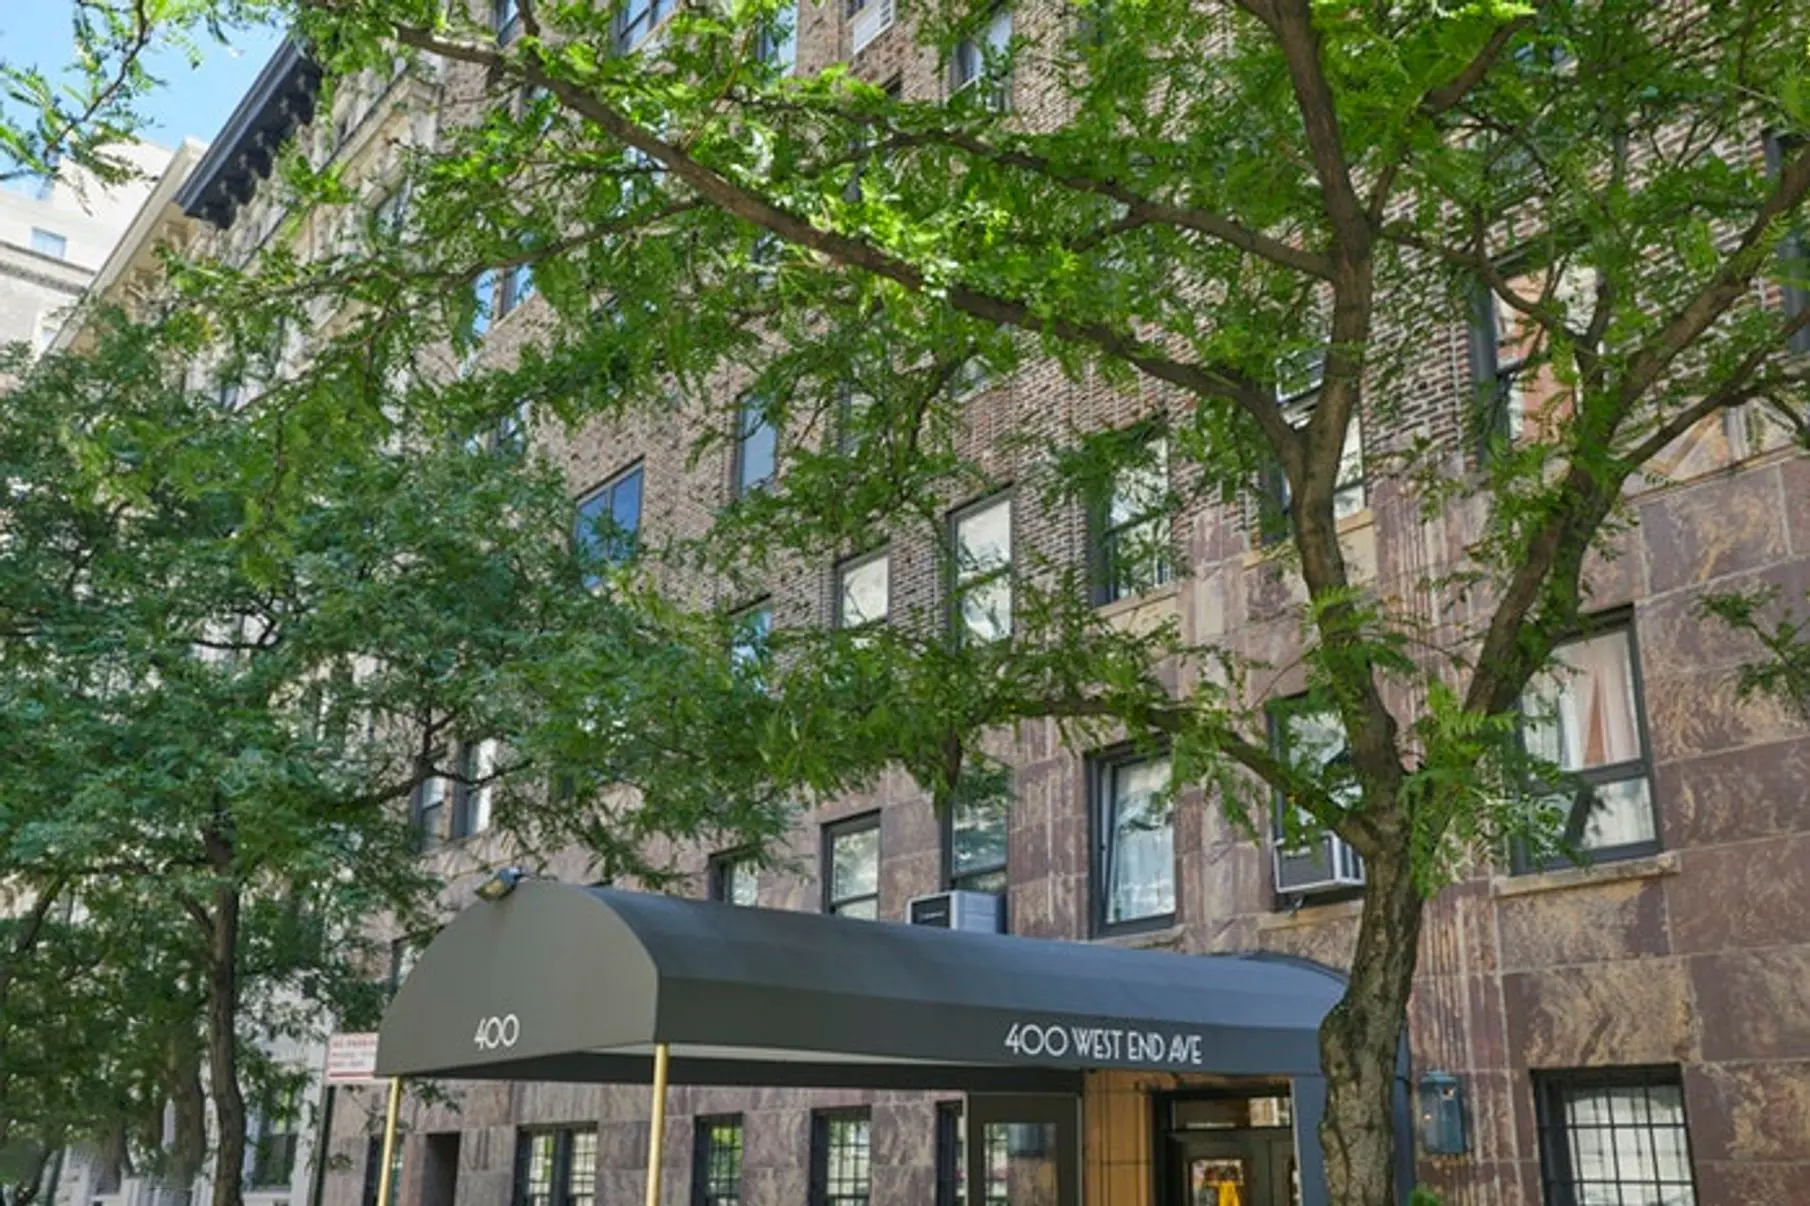 The Wexford, 400 West End Avenue